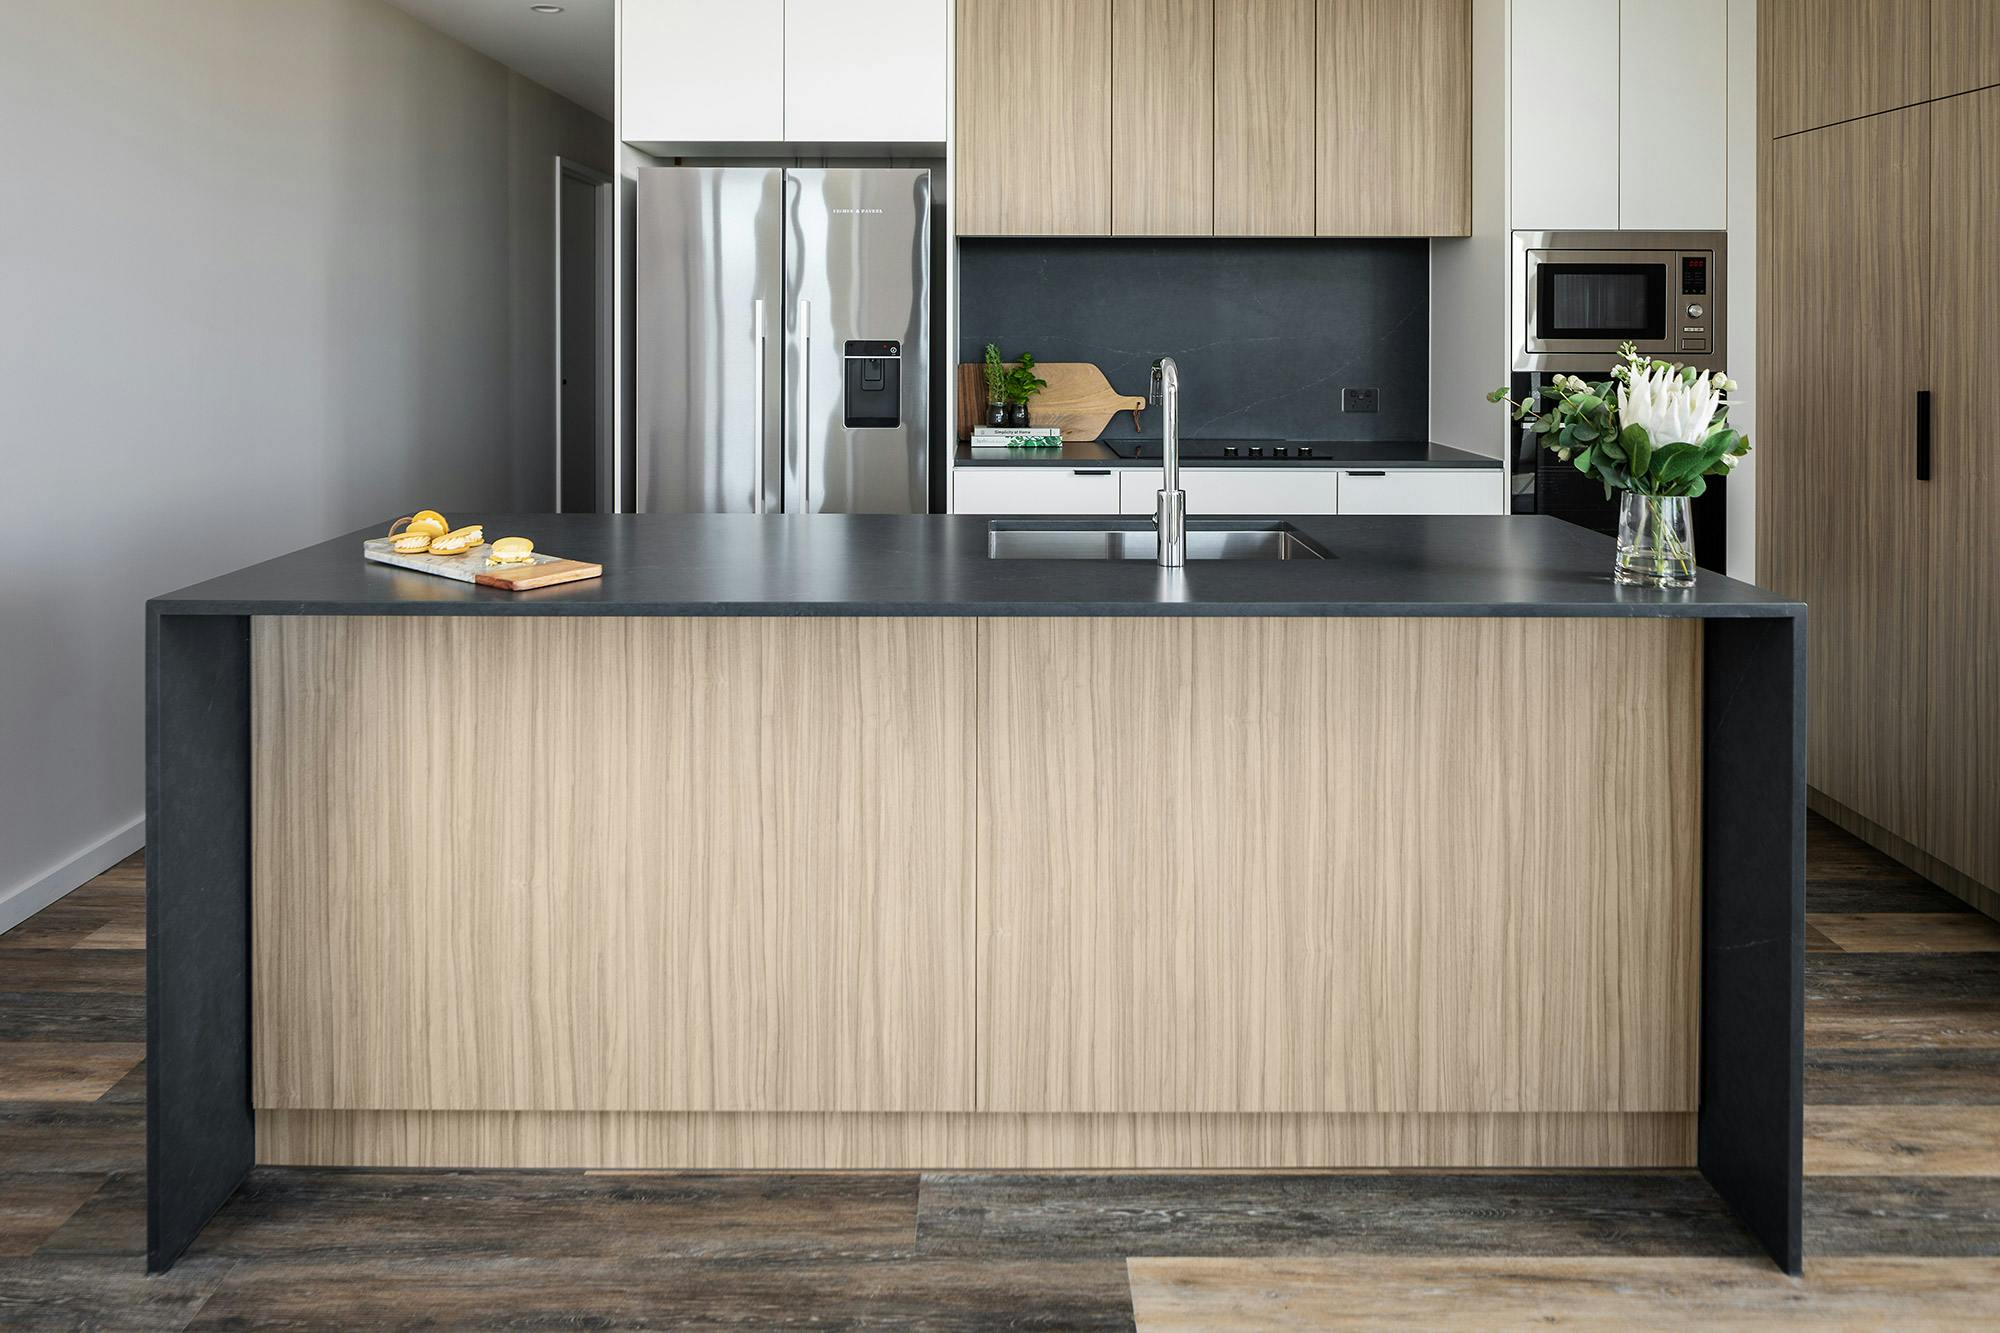 Image of ELEMENT27 cocina 1.jpg?auto=format%2Ccompress&ixlib=php 3.3 in {{A luxurious rental building chooses Cosentino for its durability, elegance and sustainability}} - Cosentino